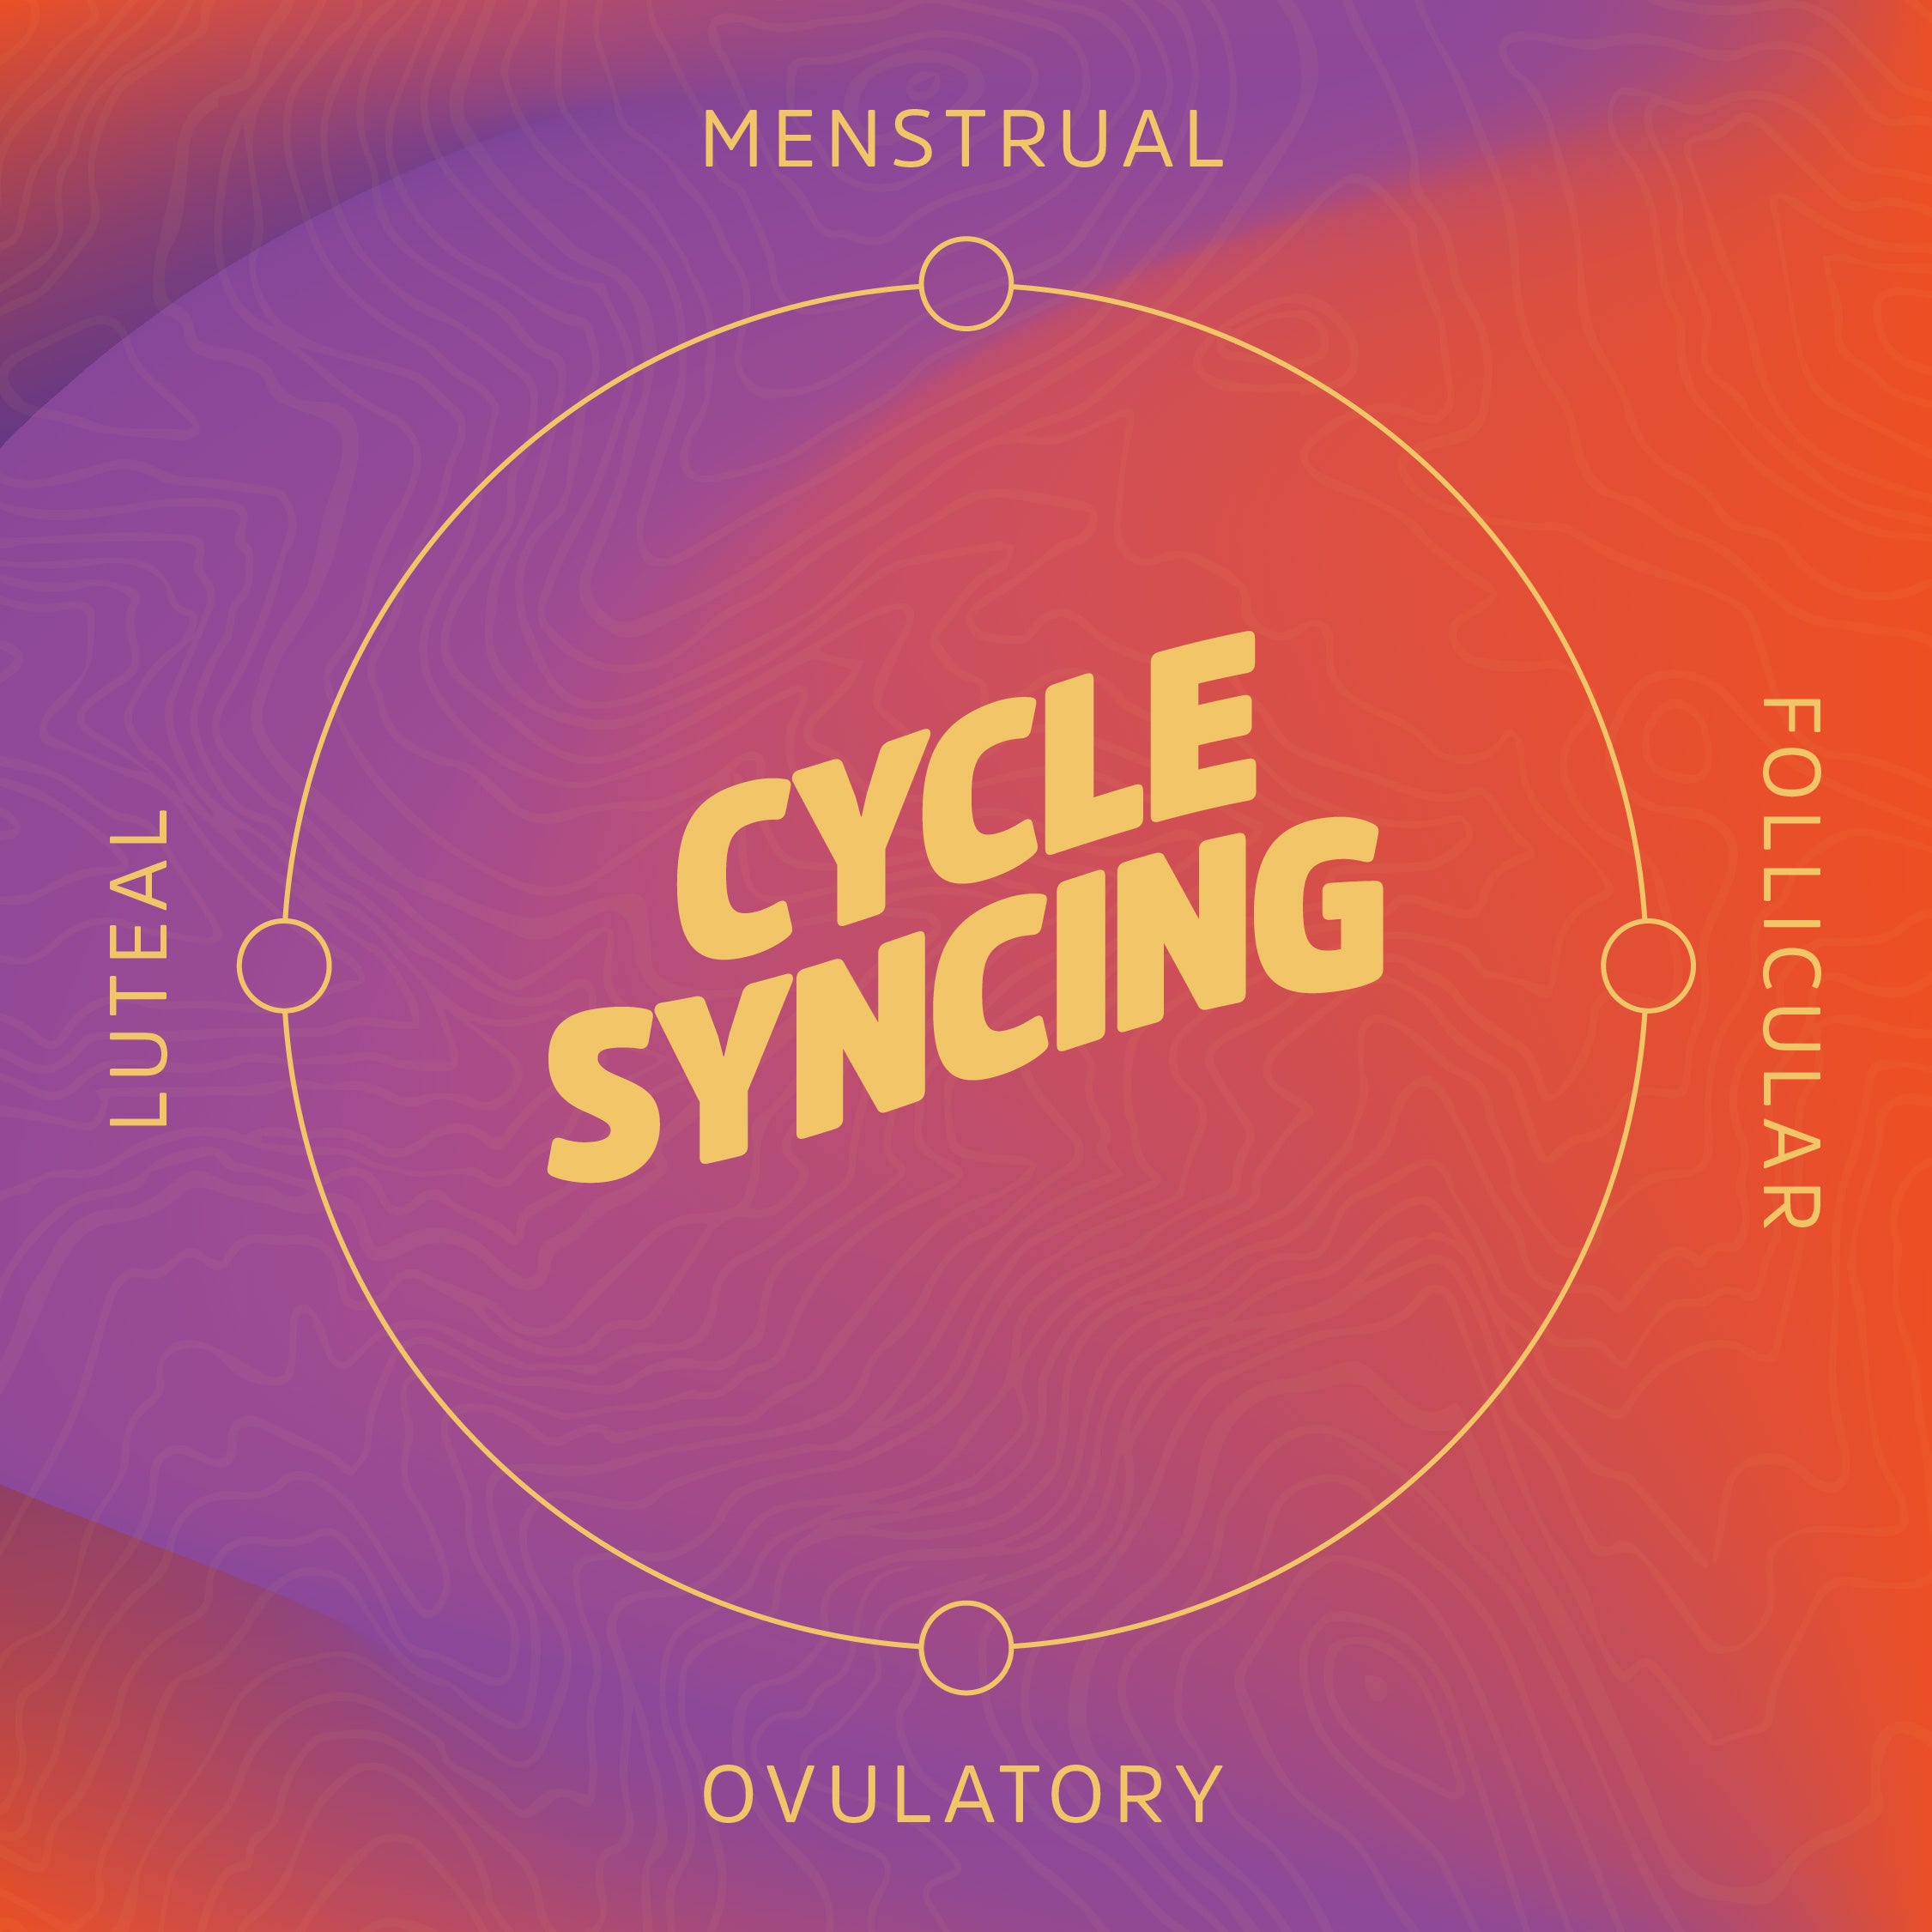 Cycle Syncing: How to Eat and Exercise During Your Menstrual Cycle